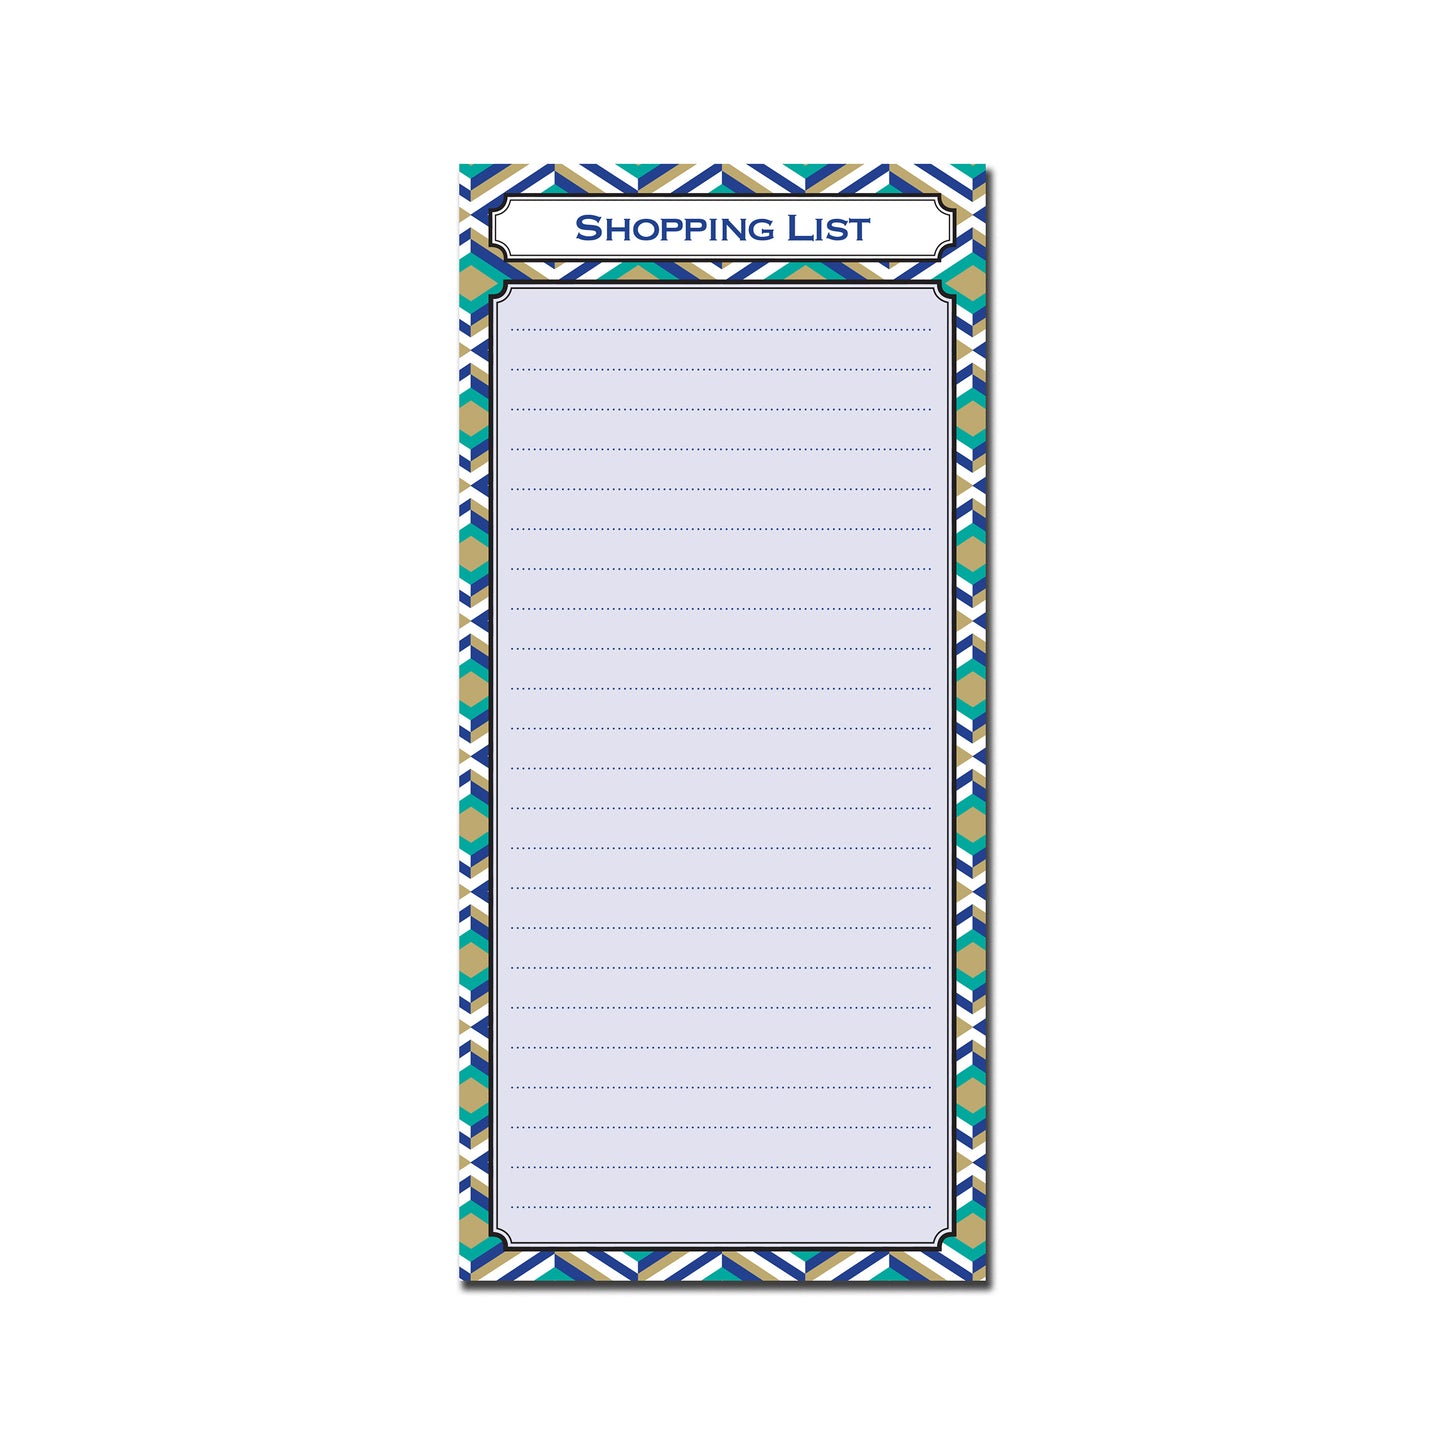 Designer Range Shopping List Pad 99mm x 210mm 80gsm 100pages with Magnetic Strip on back